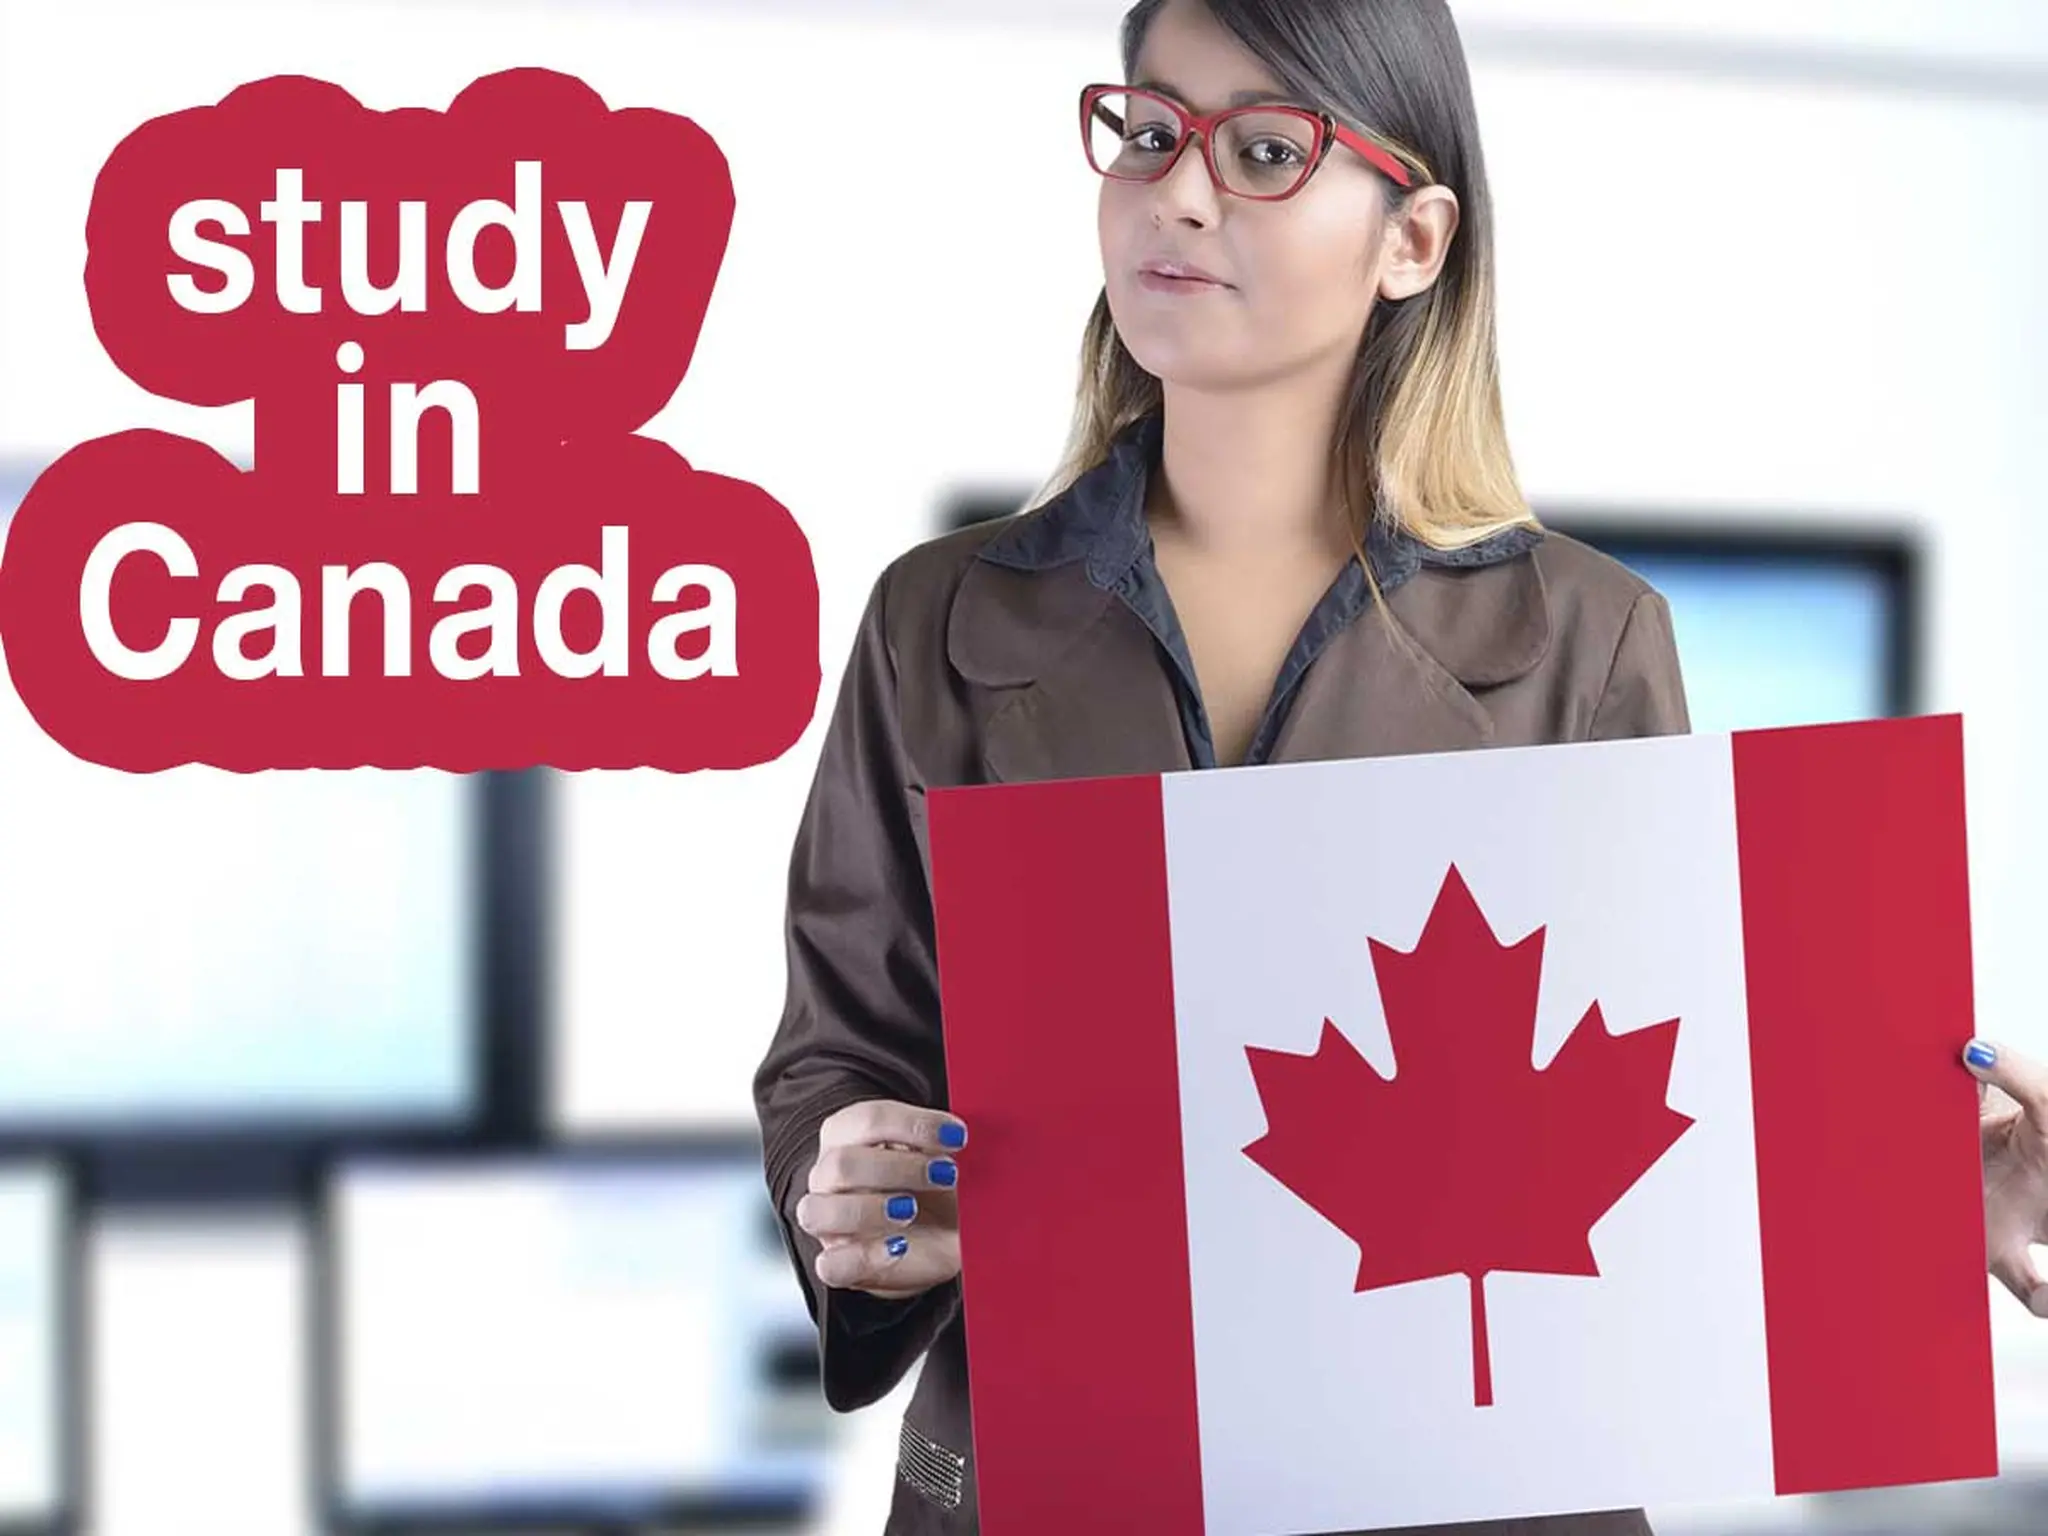 Canada: 40% of student visa applications from this country are rejected